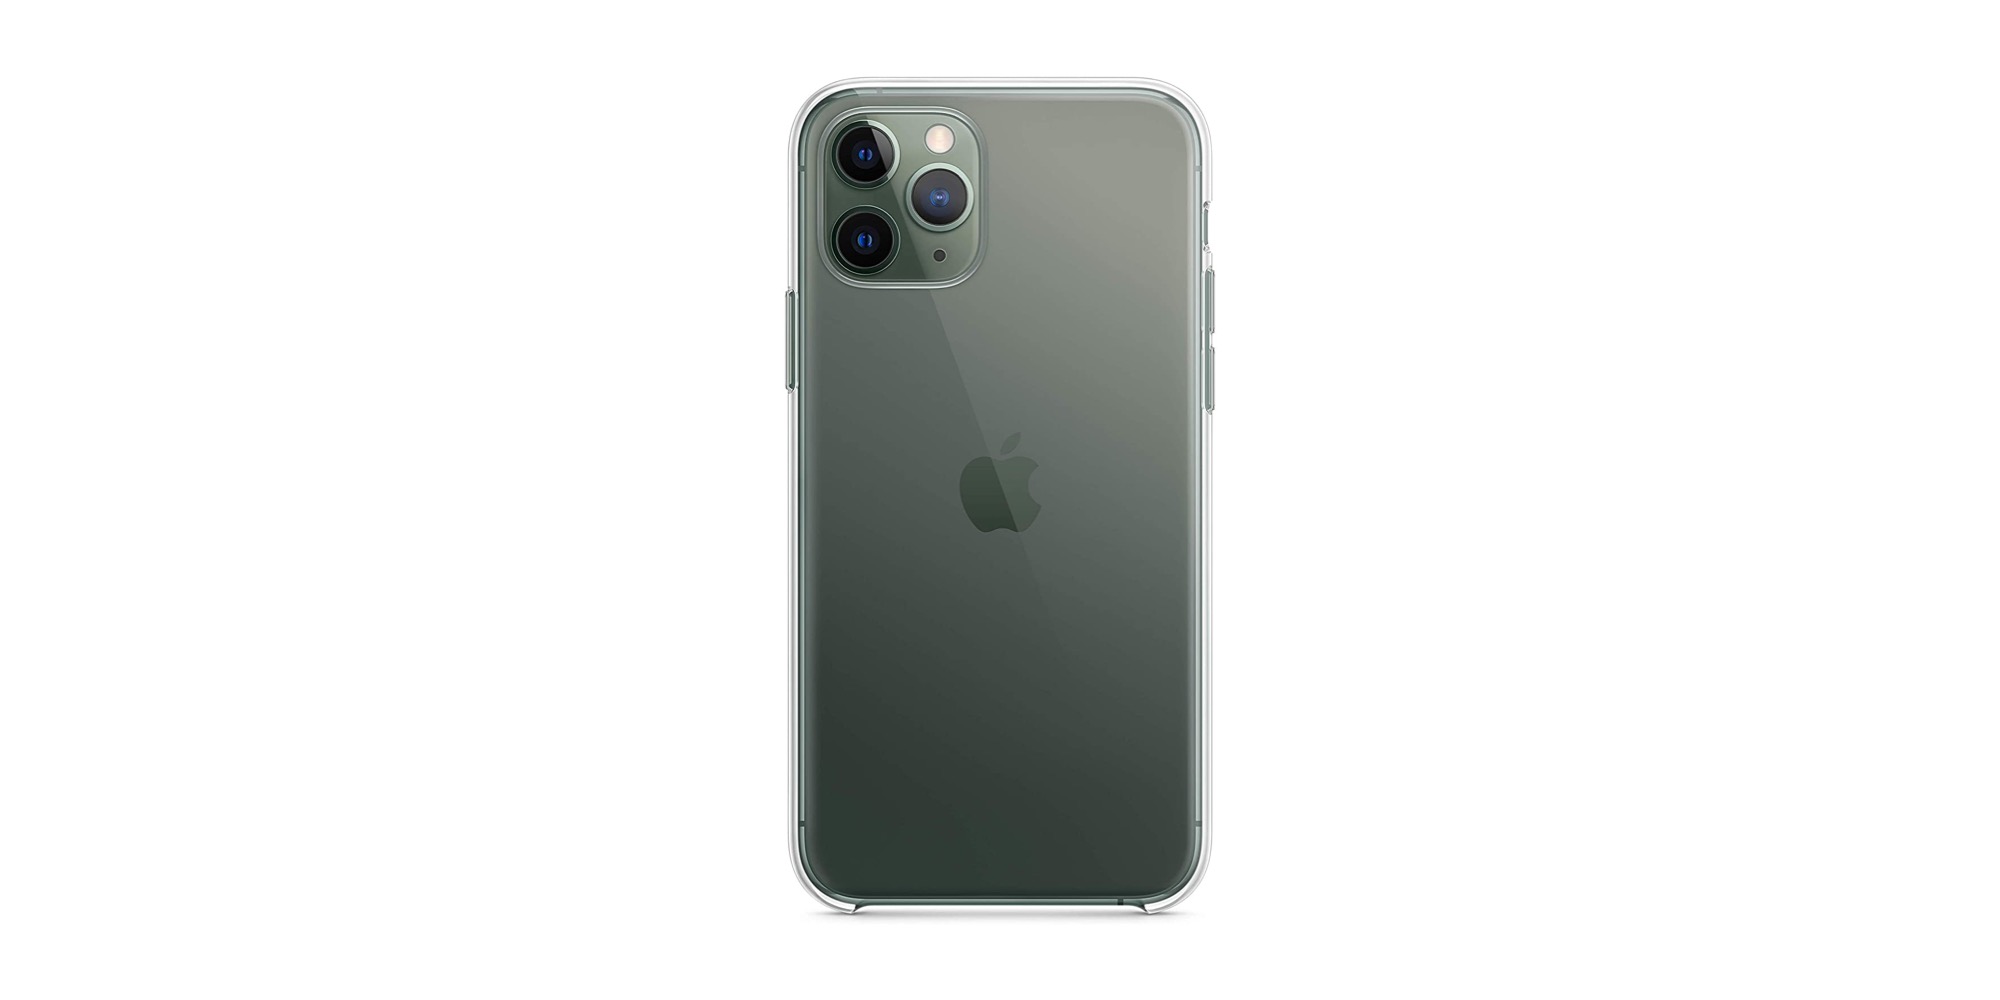 Amazon slashes Apple iPhone 11 Pro/Max cases by up to 40%, now priced